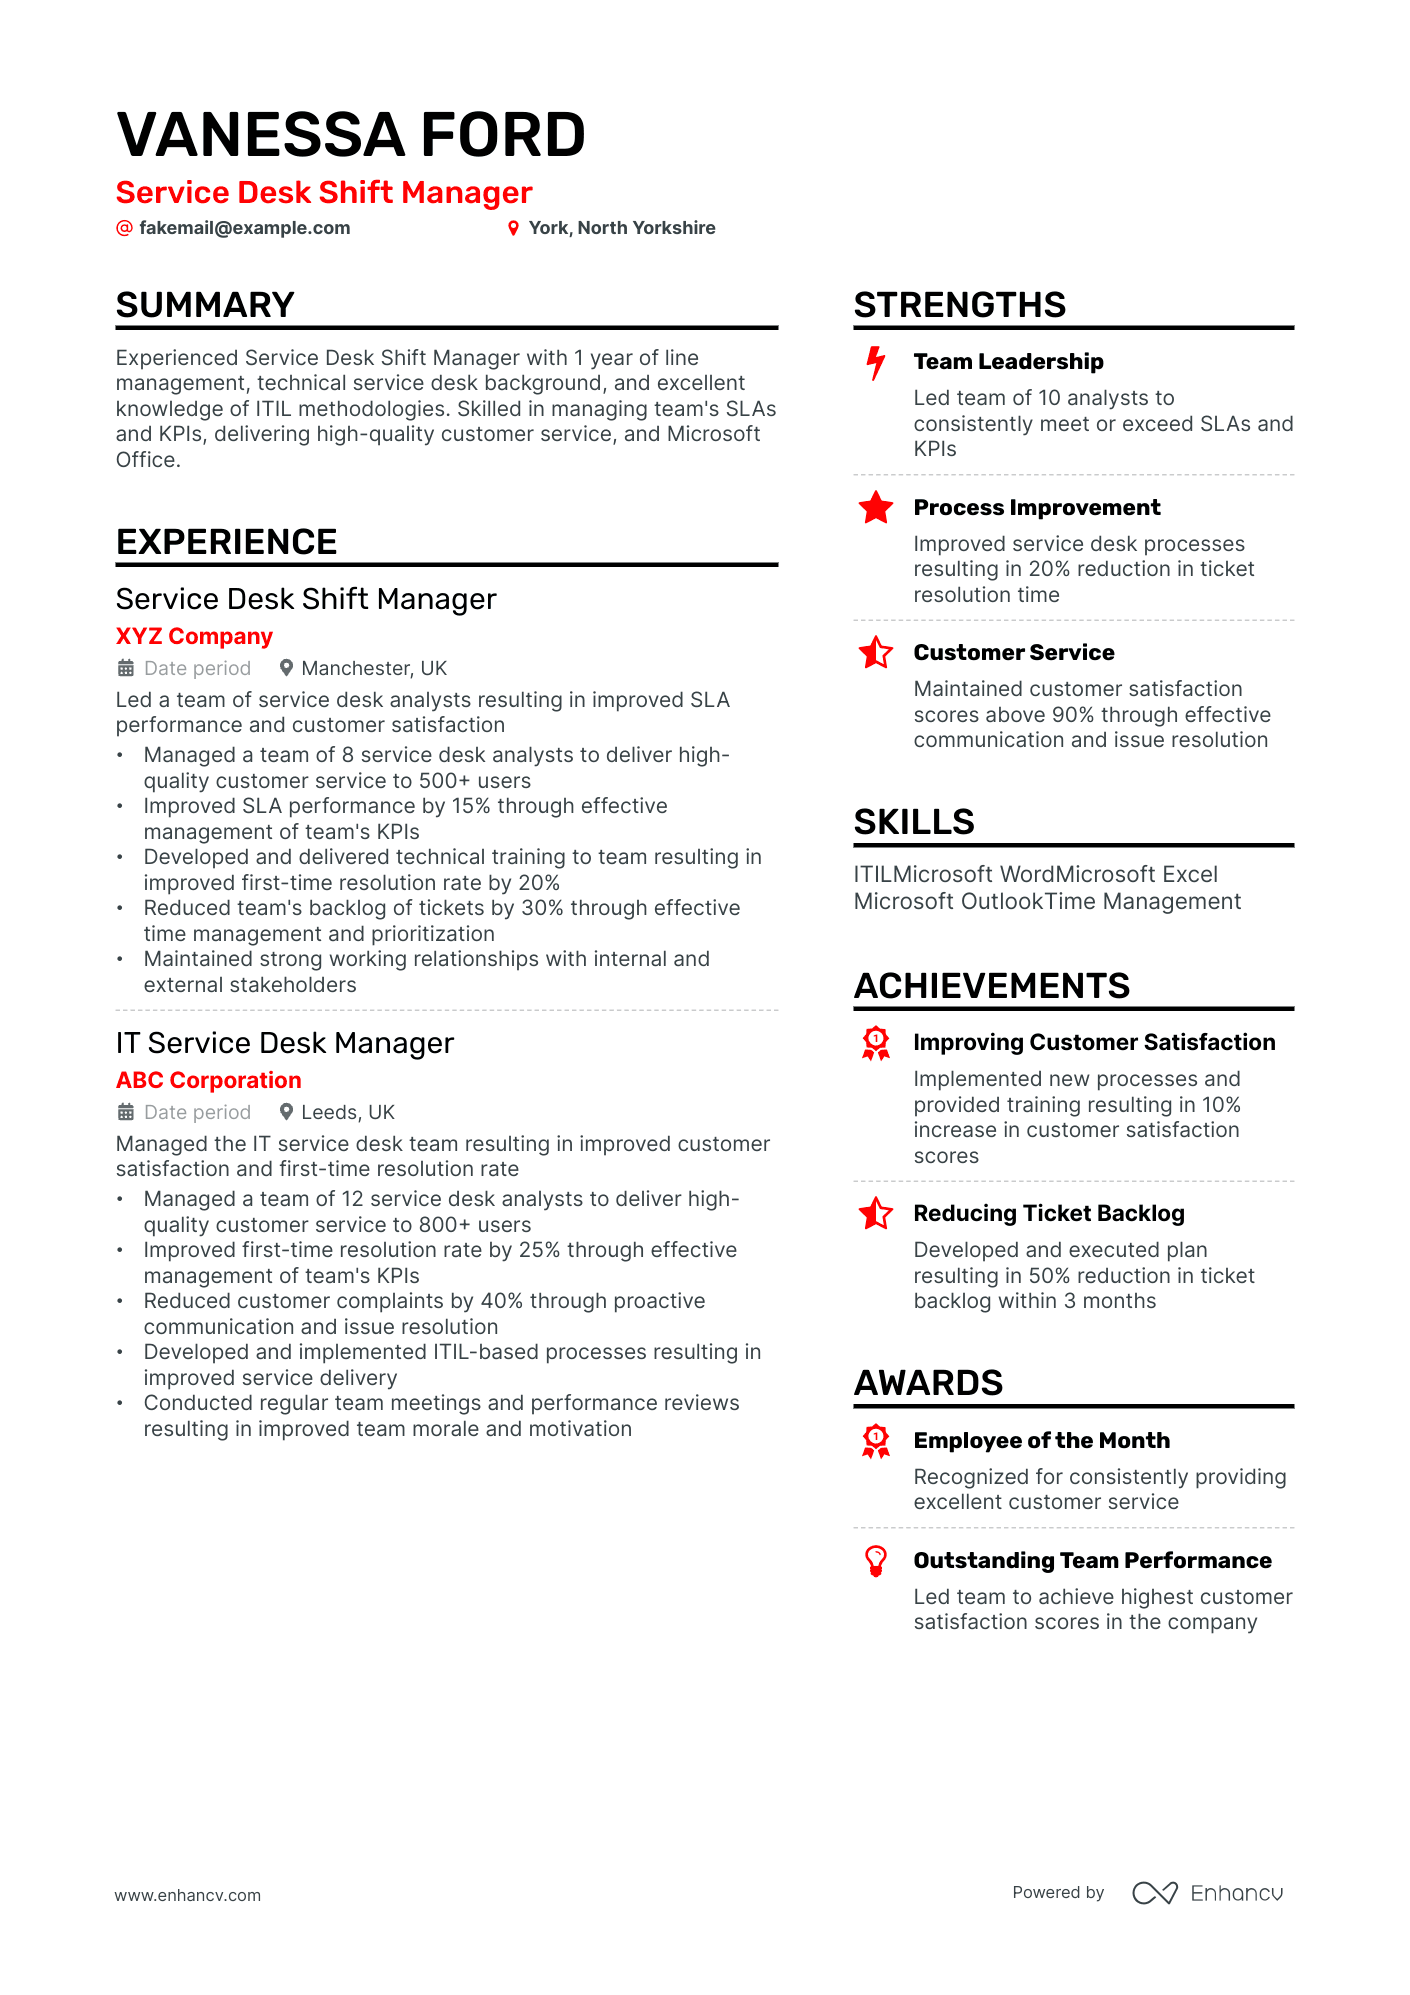 Service Desk Manager resume example